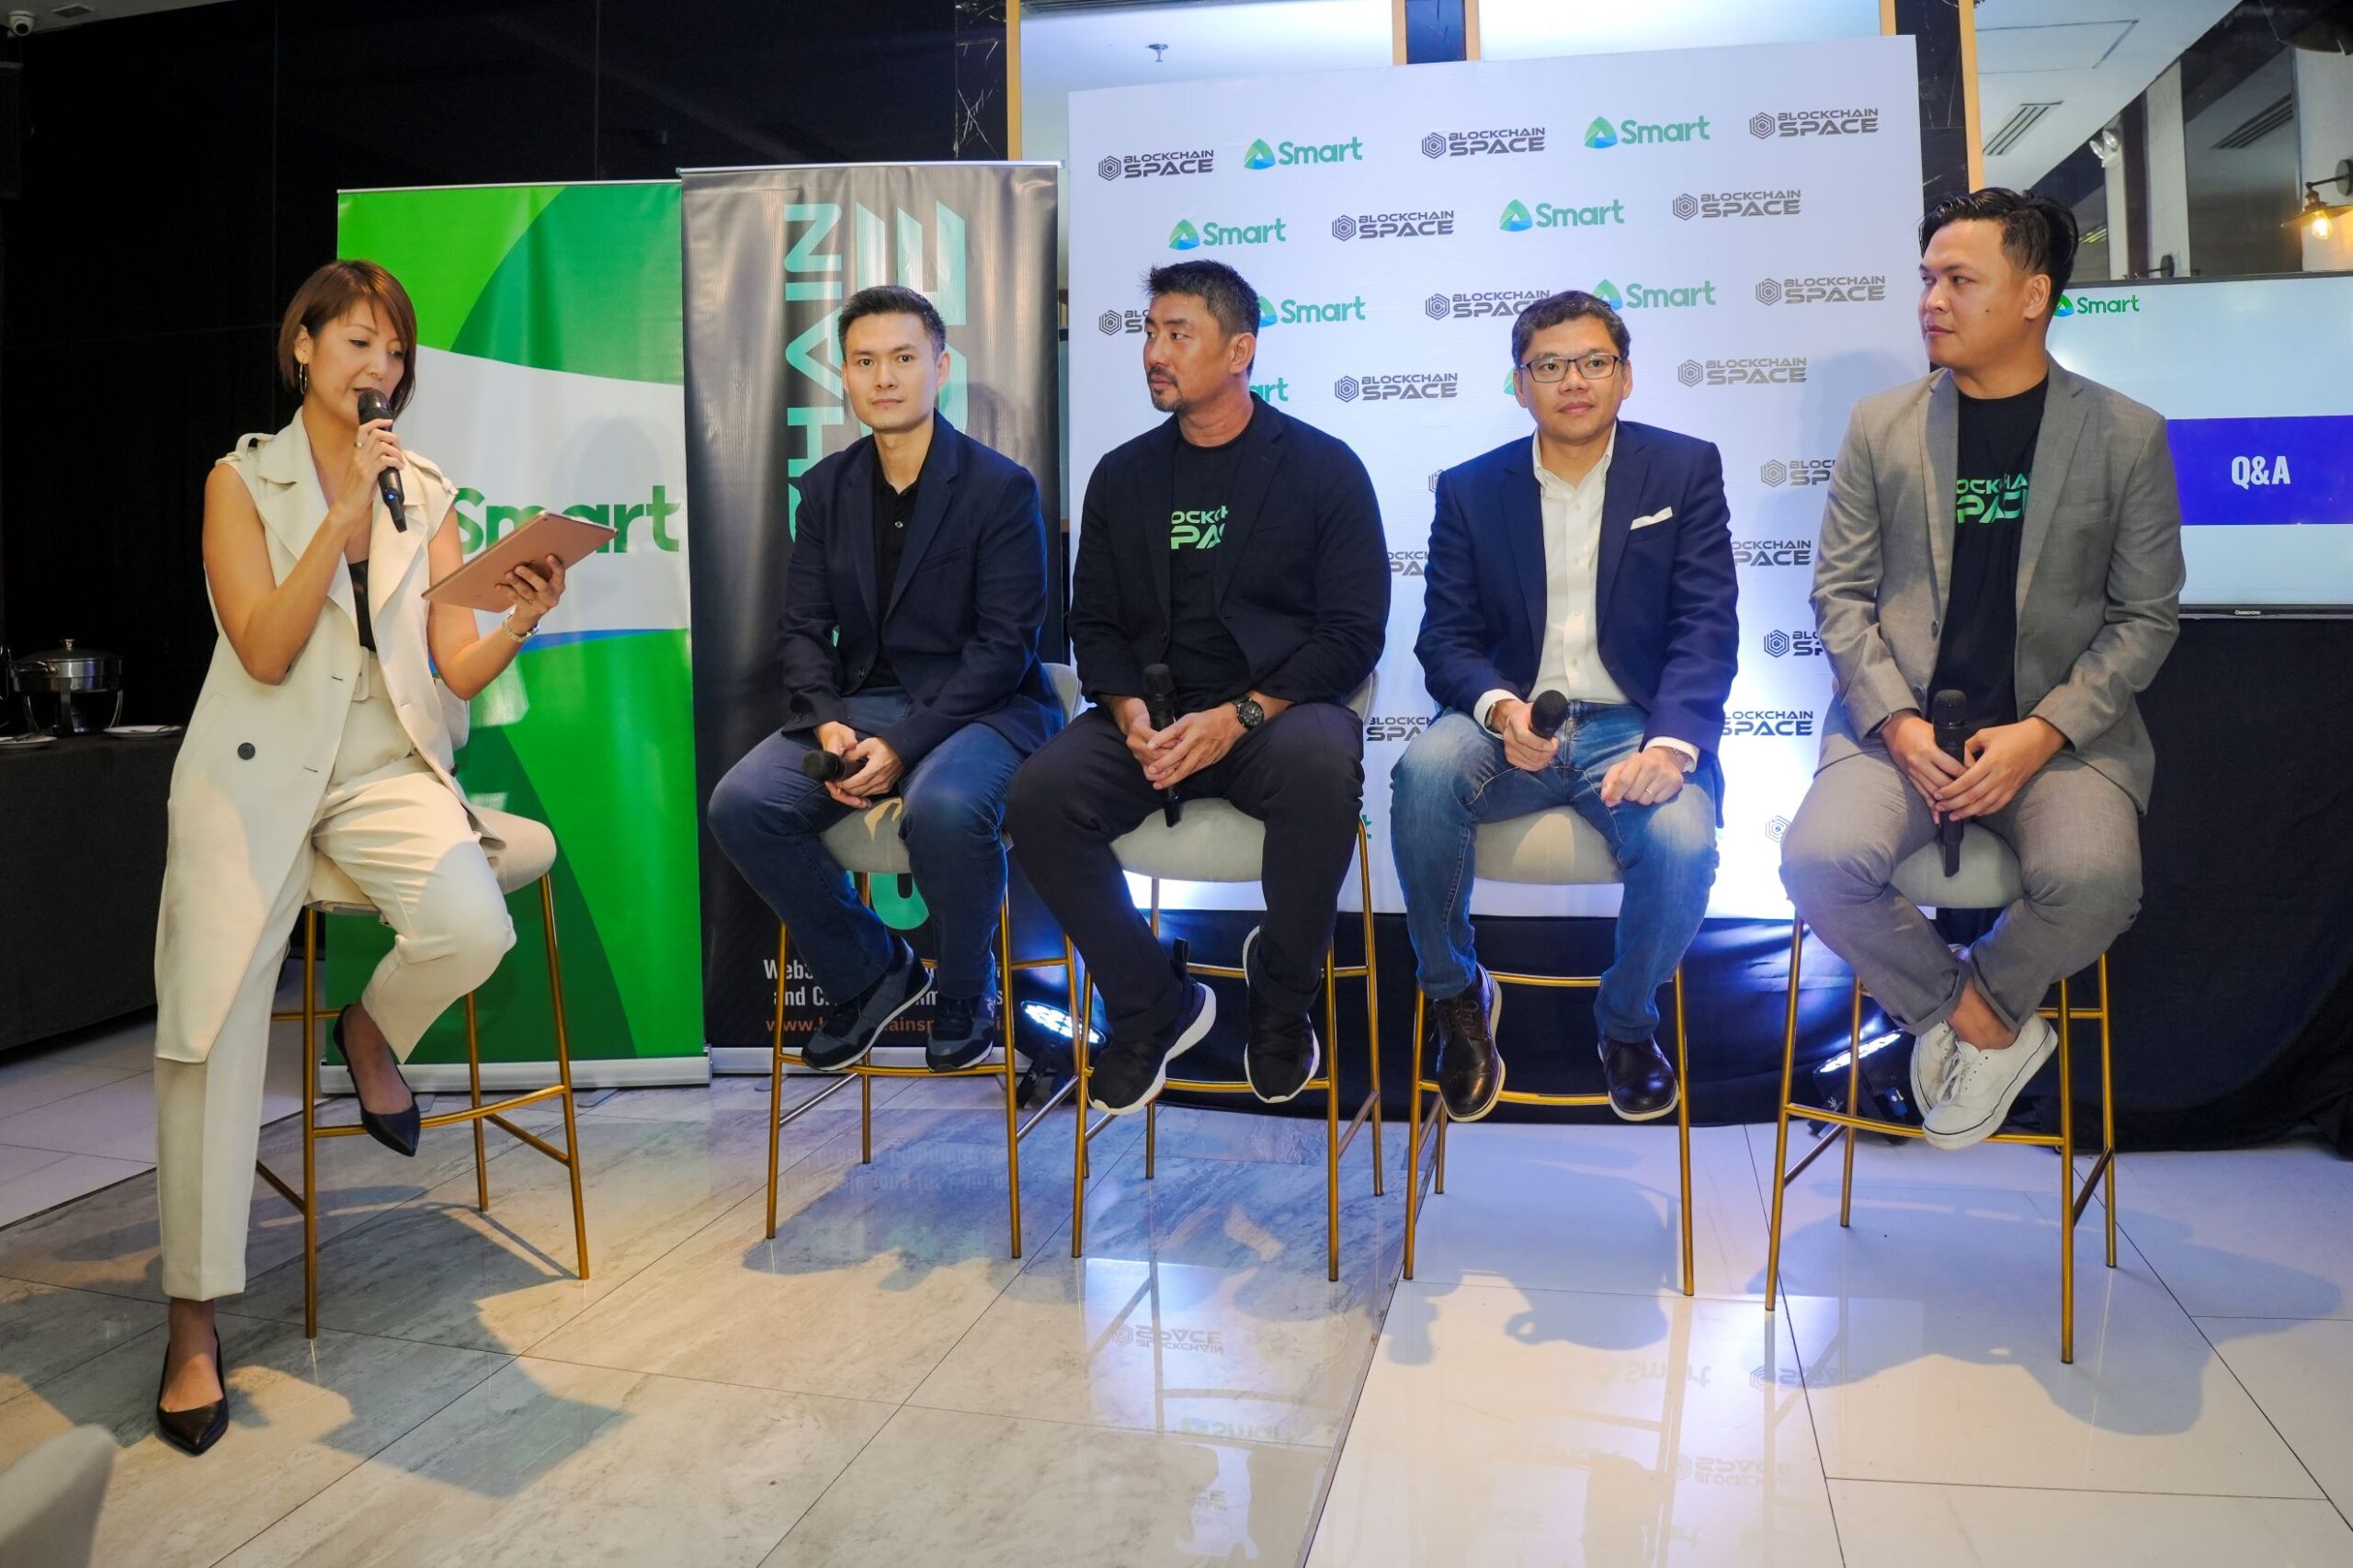 The panel consisting of Dexter Chan, Smart AVP for Content Business Development; Peter Ing, BlockchainSpace founder and CEO; Lloyd Manaloto, Smart FVP and Head of Prepaid and Content; and Aspen Sañez, BlockchainSpace global head of marketing, answer questions from the media.